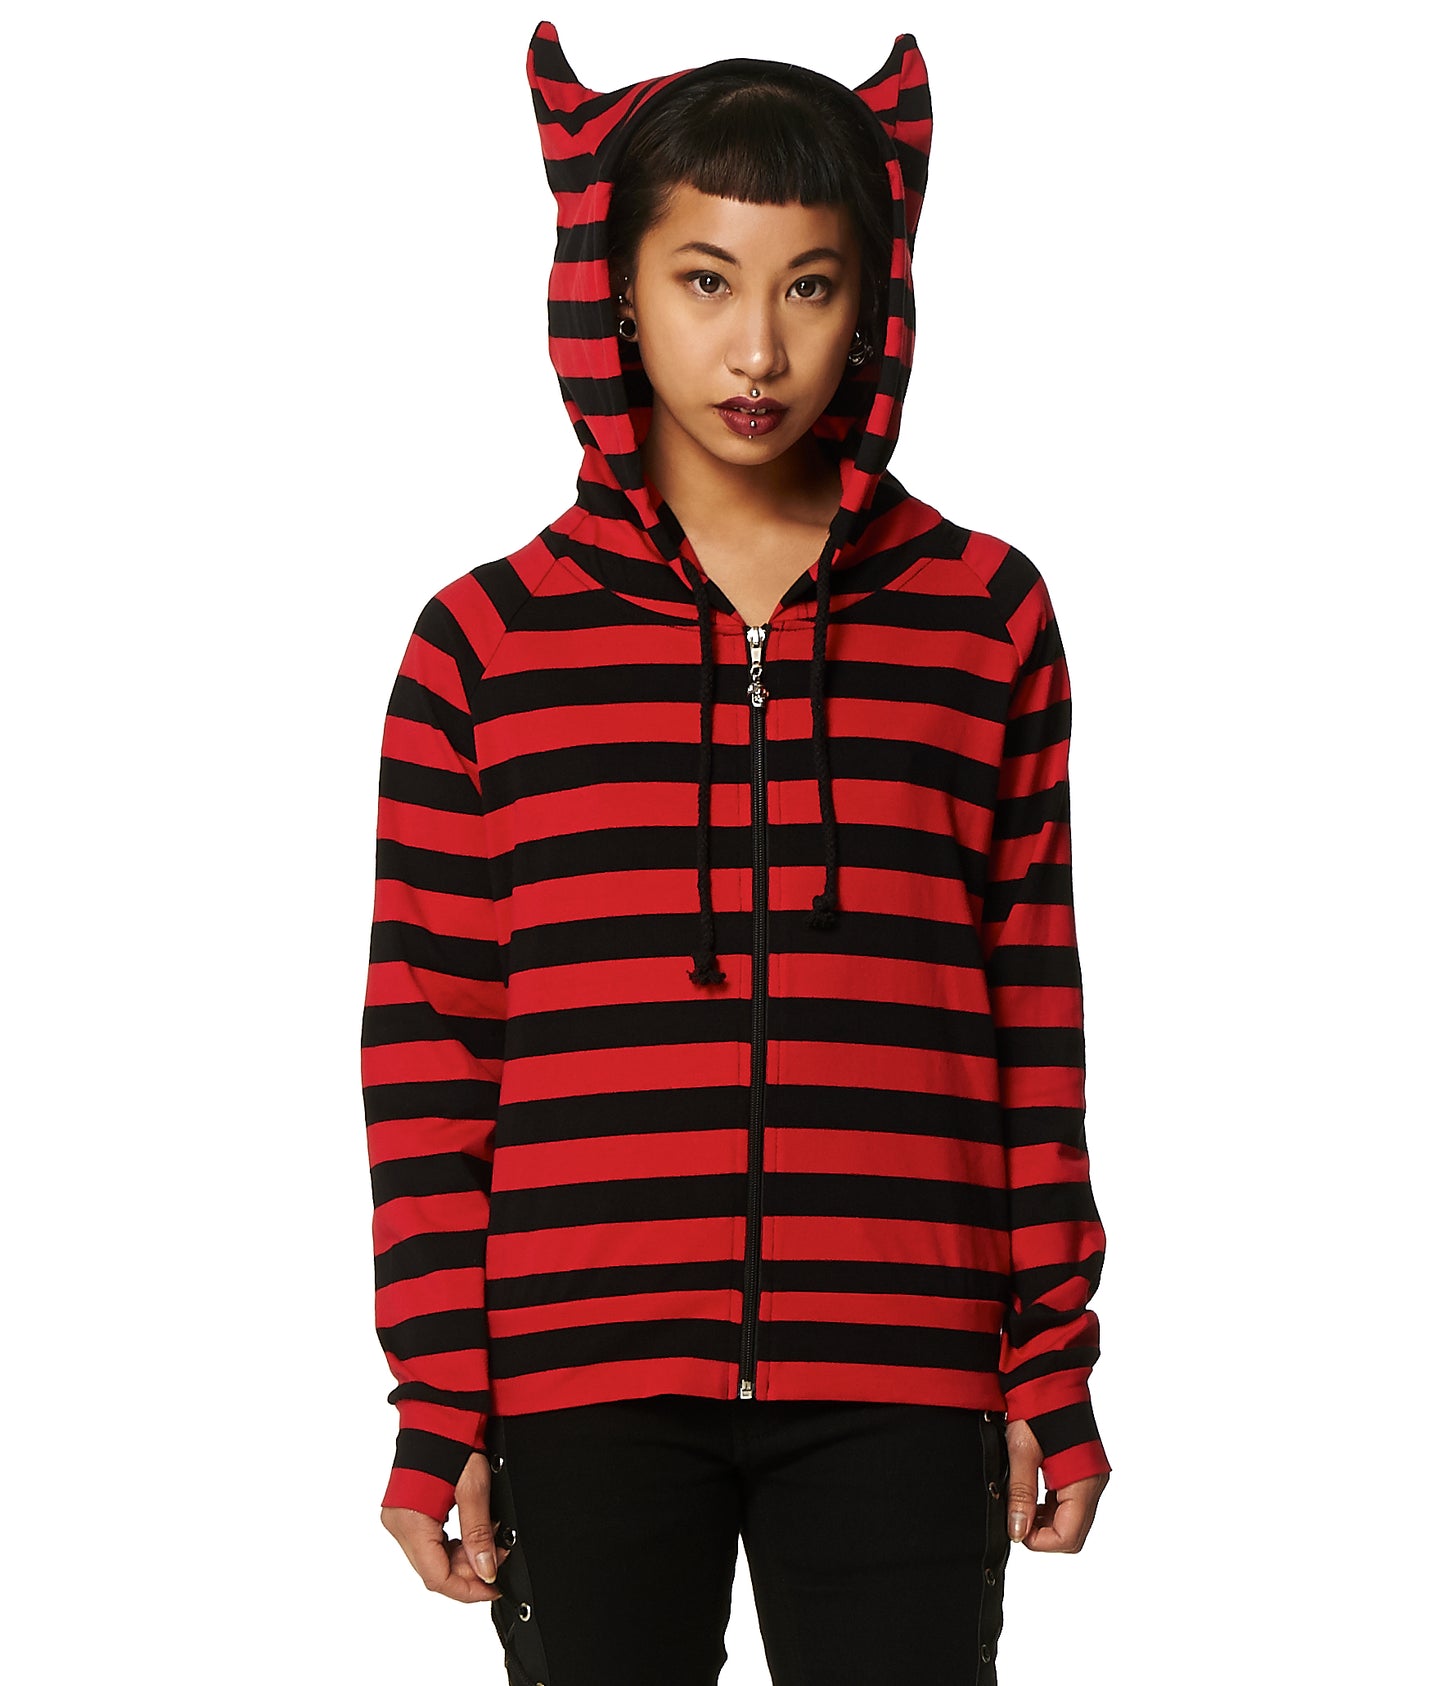 Model wearing a red and black stripes zip up hoodie with cat ears on the hood and thumb holes in the sleeves